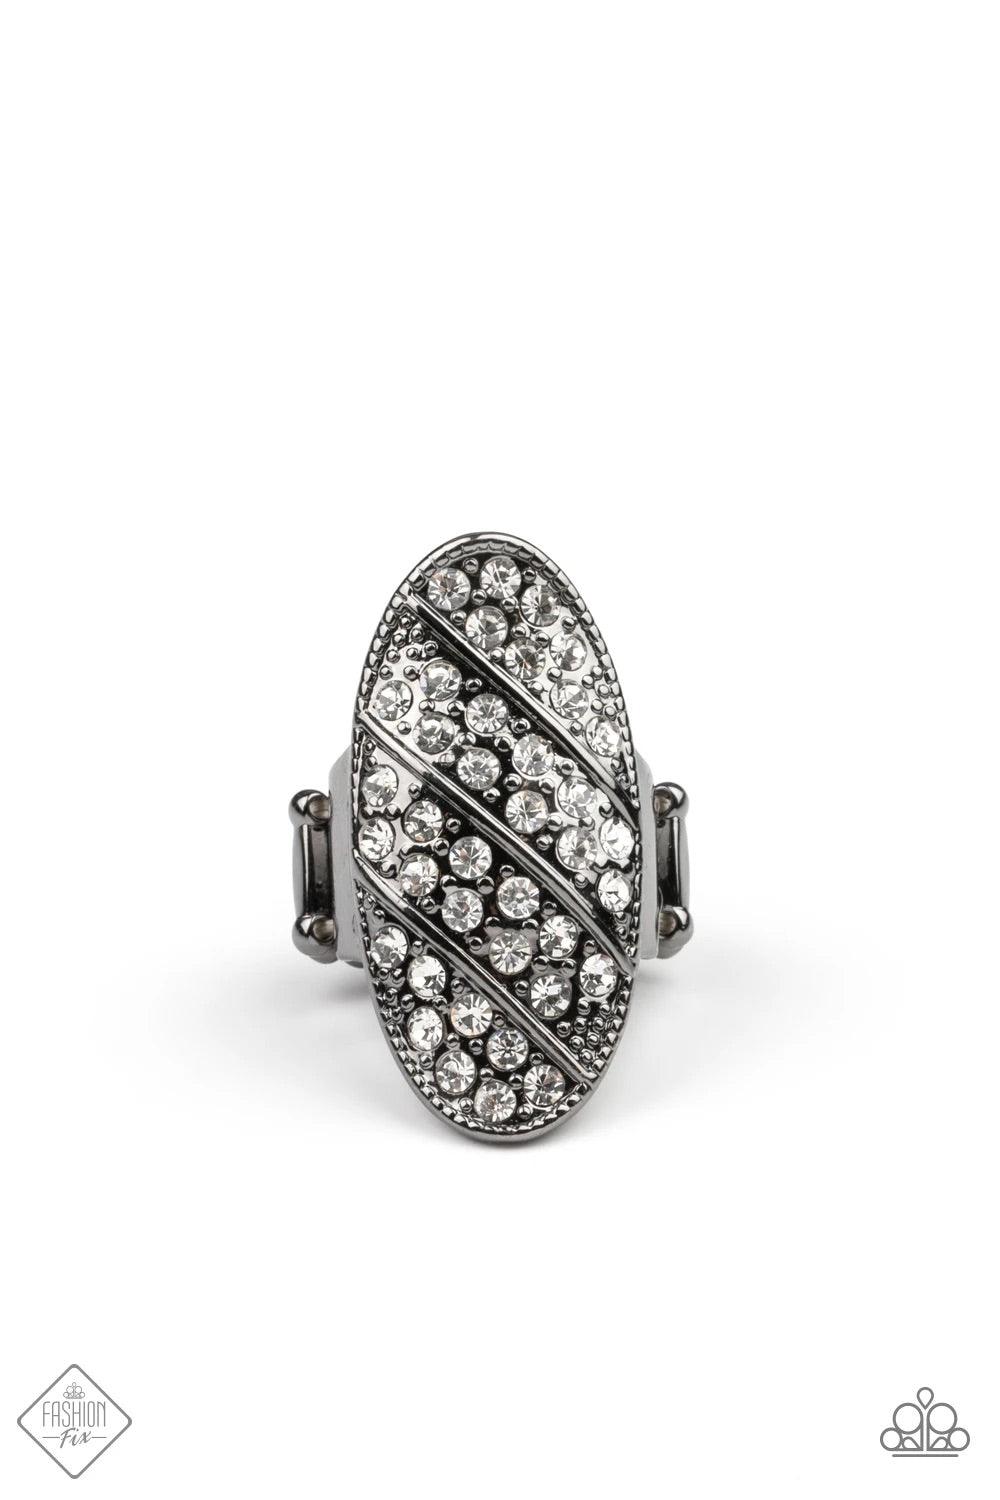 Paparazzi Accessories Galactic Glitz - Black Rows of glassy white rhinestones slant across a stretched oval frame dotted in gunmetal studs, creating a dramatic centerpiece atop the finger. Features a stretchy band for a flexible fit.Sold as one individual